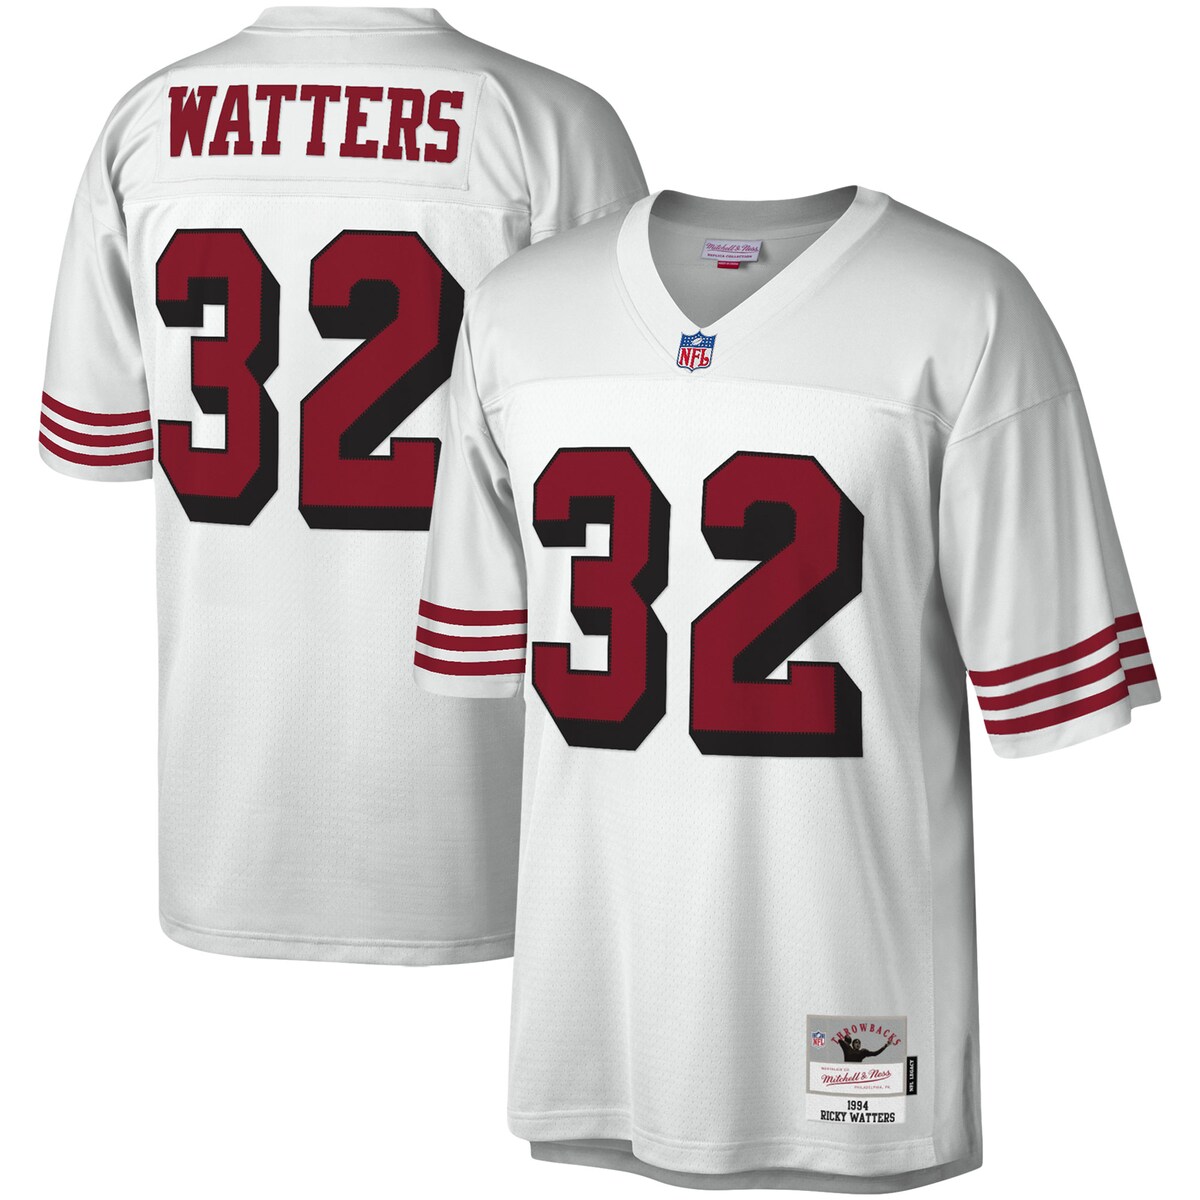 You're a massive San Francisco 49ers fan and also loved watching Ricky Watters play. Now you can show off your fandom for both when you get this Ricky Watters San Francisco 49ers Legacy replica jersey from Mitchell & Ness. It features distinctive throwback San Francisco 49ers graphics on the chest and back, perfect for wearing at a home game. By wearing this jersey, you'll be able to feel like you're reliving some of the great plays that Ricky Watters accomplished to lead the San Francisco 49ers to glory.Officially licensedWoven tags at bottom hemMaterial: 100% PolyesterBrand: Mitchell & NessFabric applique sewn onShort sleevesSublimated rib-knit sleeve insertsEmbroidered twill graphicsImportedEmbroidered NFL Shield at collarThrowback JerseyMesh fabricV-neckMachine wash, line drySide splits at waist hem